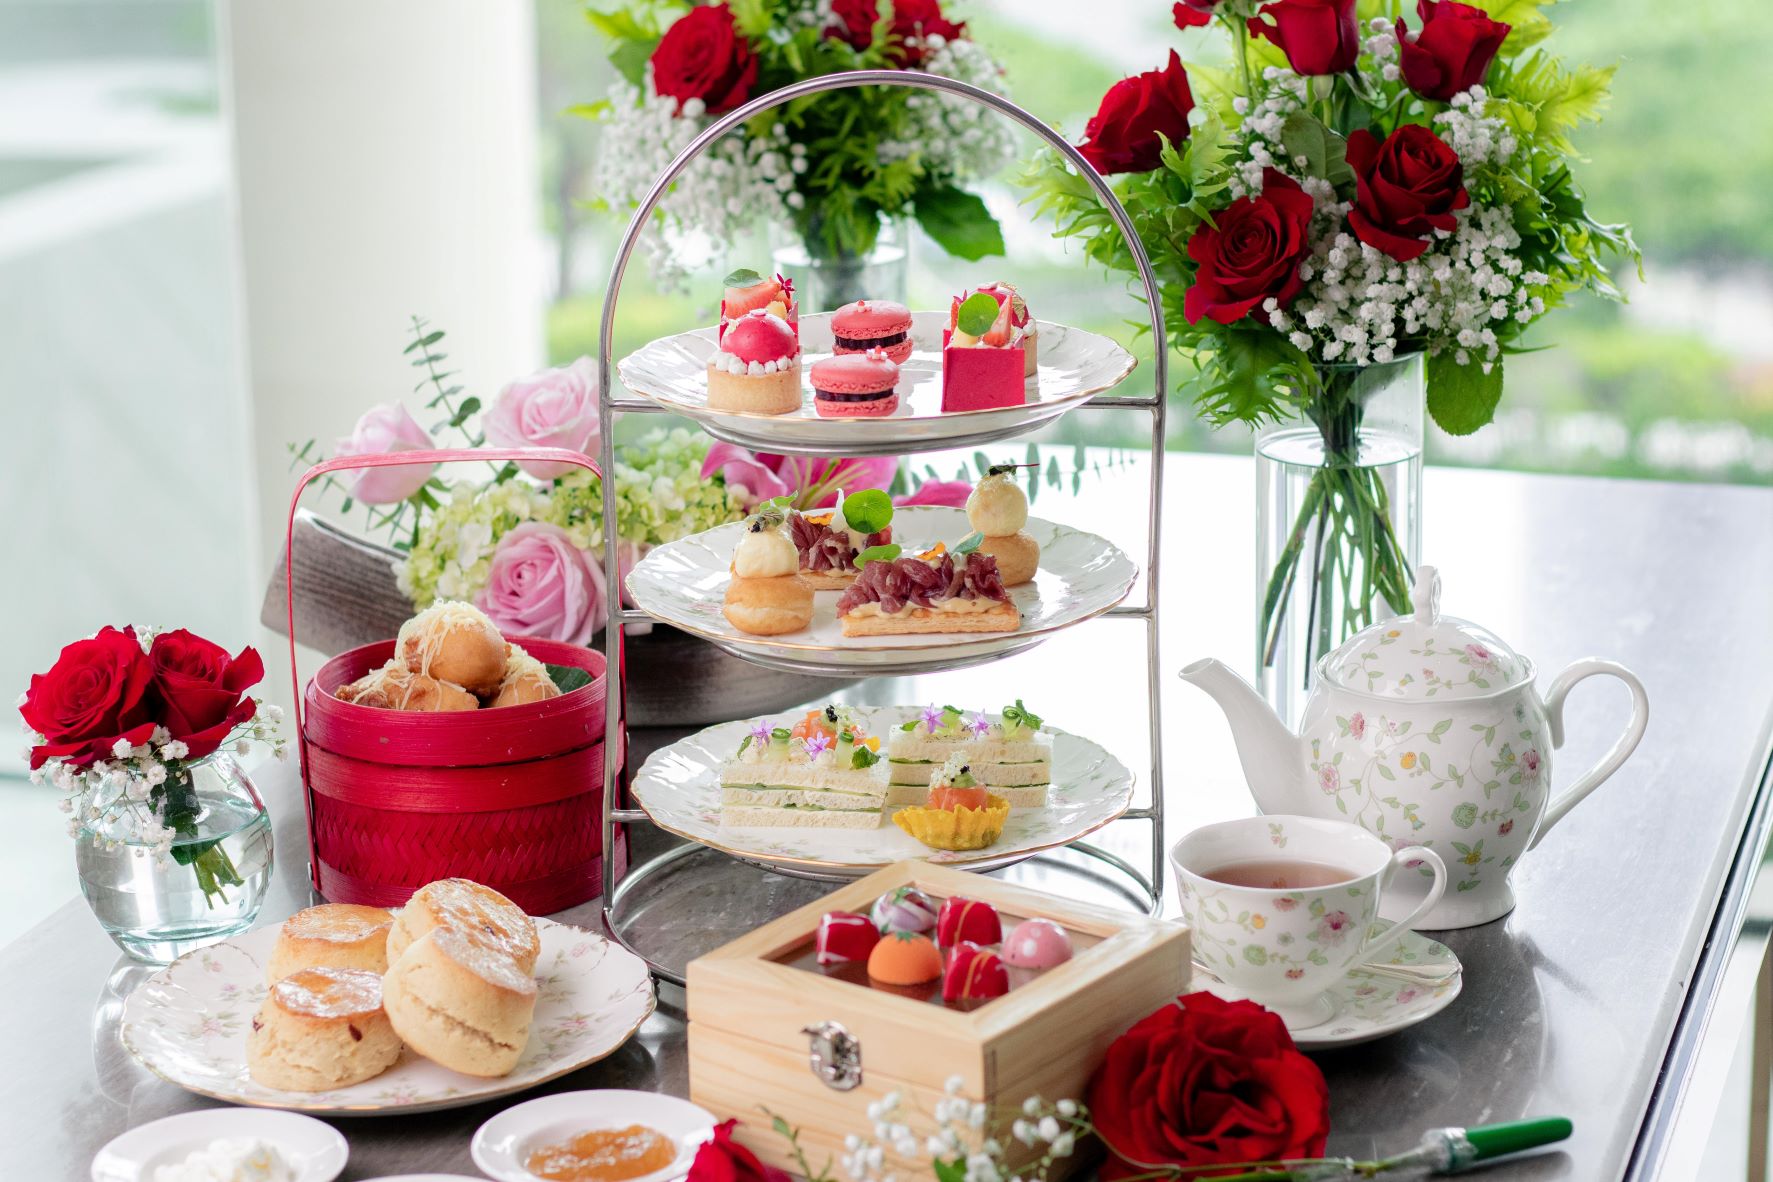 Fountain Longue at Grand Hyatt Jakarta Launches Red Afternoon Tea